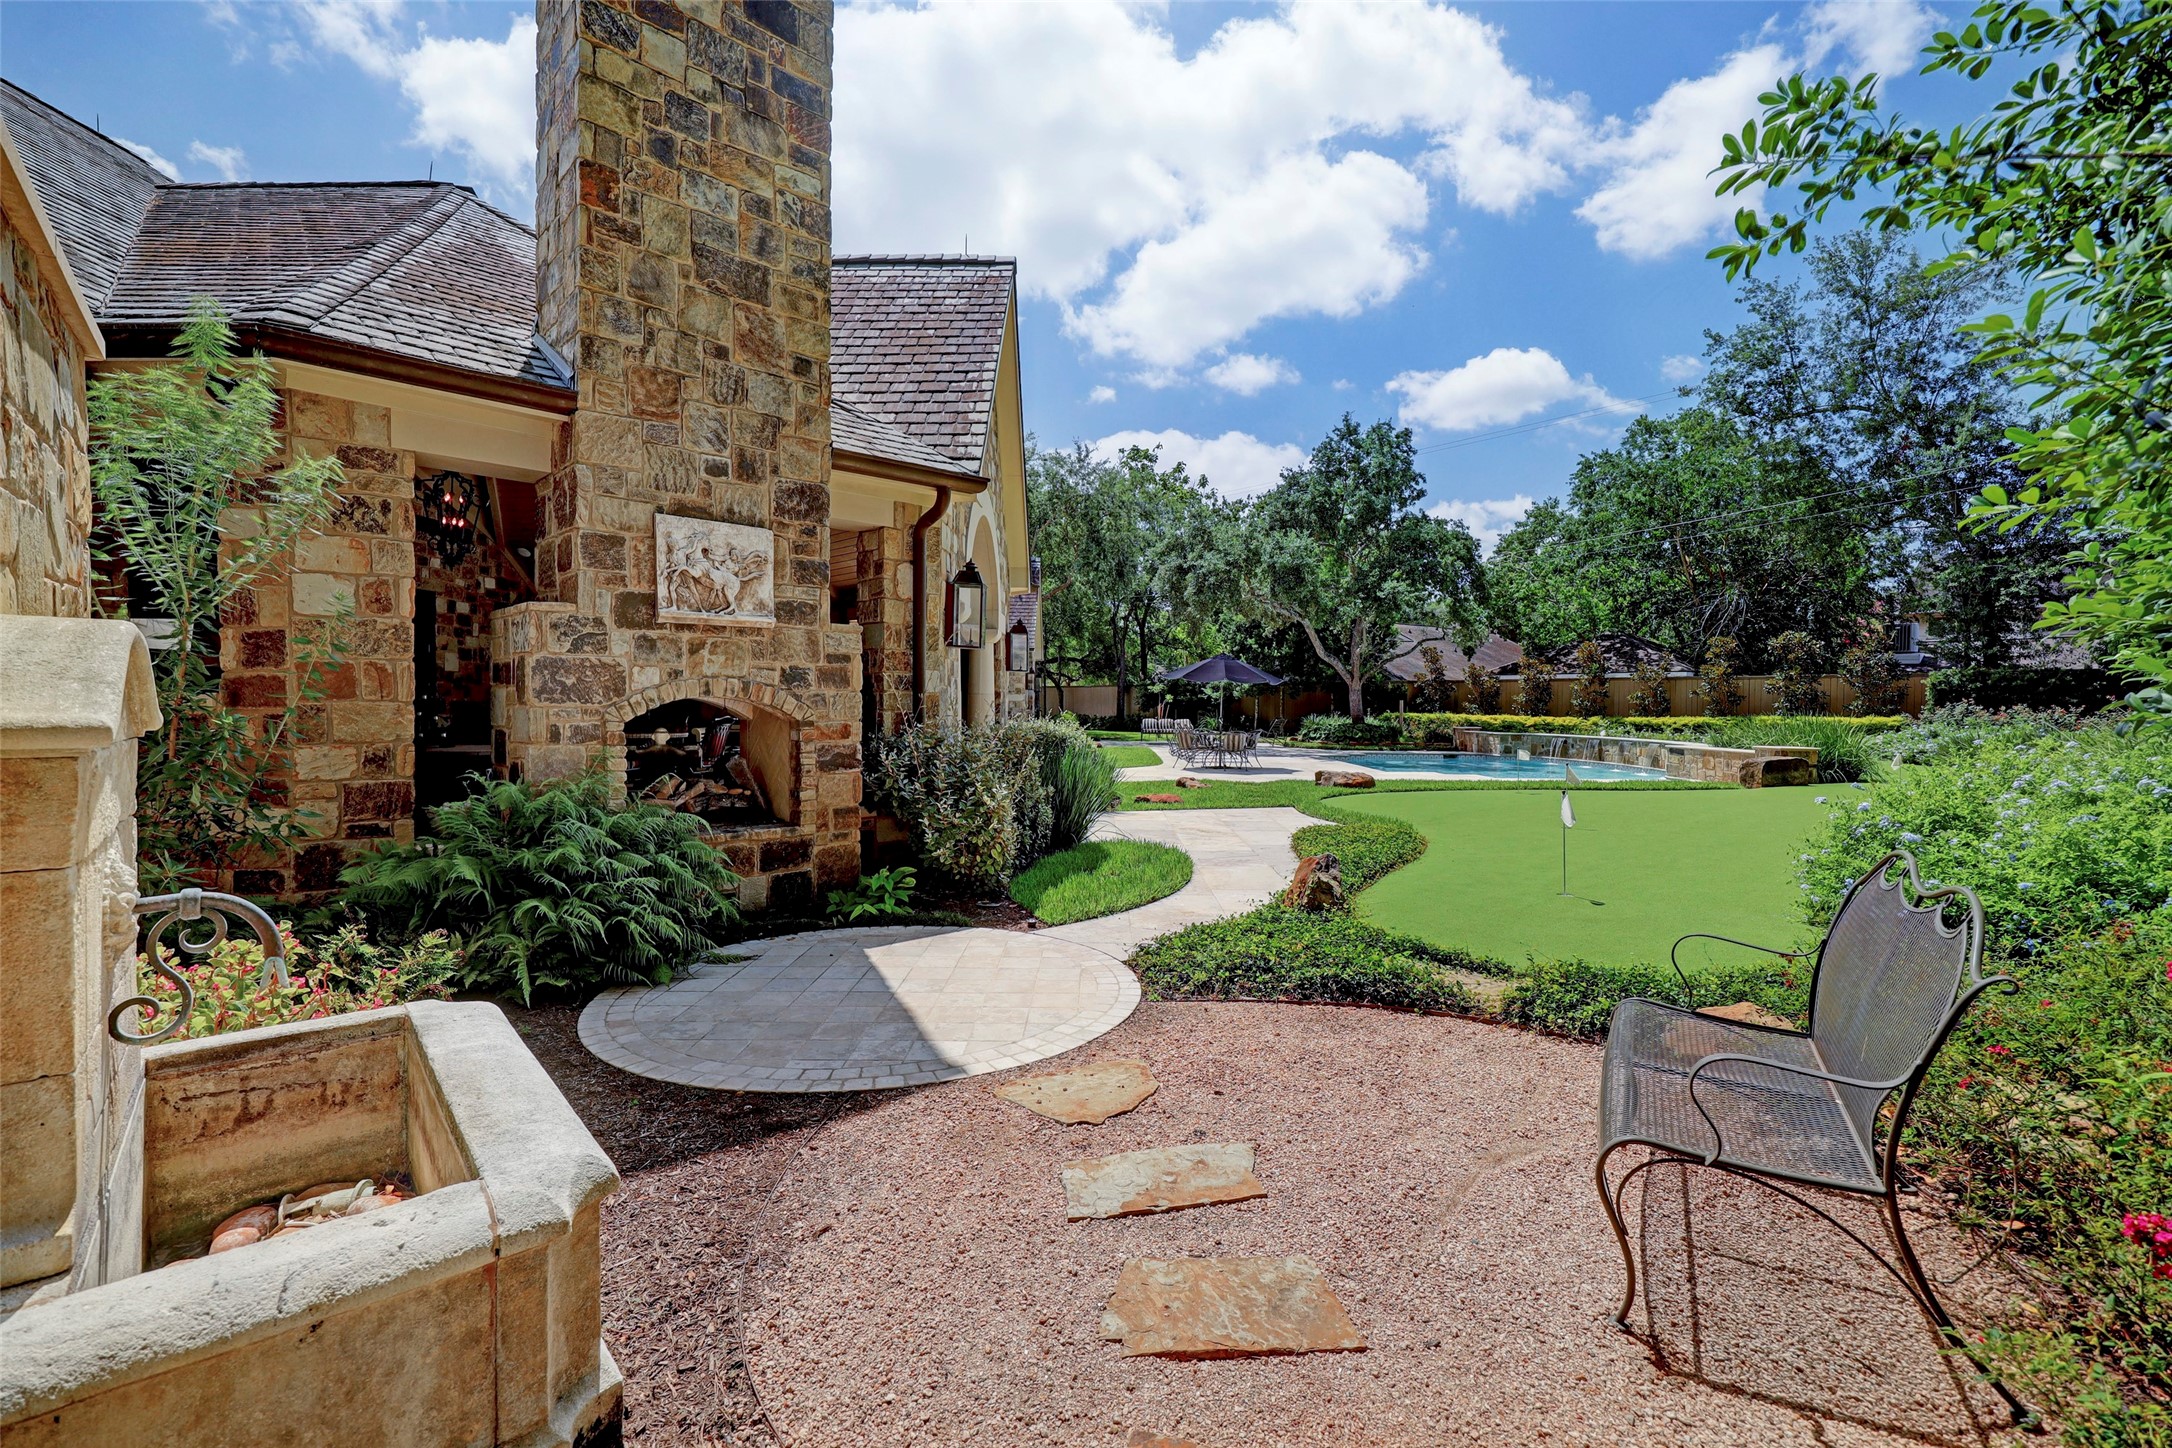 The backyard is a retreat with multiple gathering spaces including this one with a water feature and fireplace.